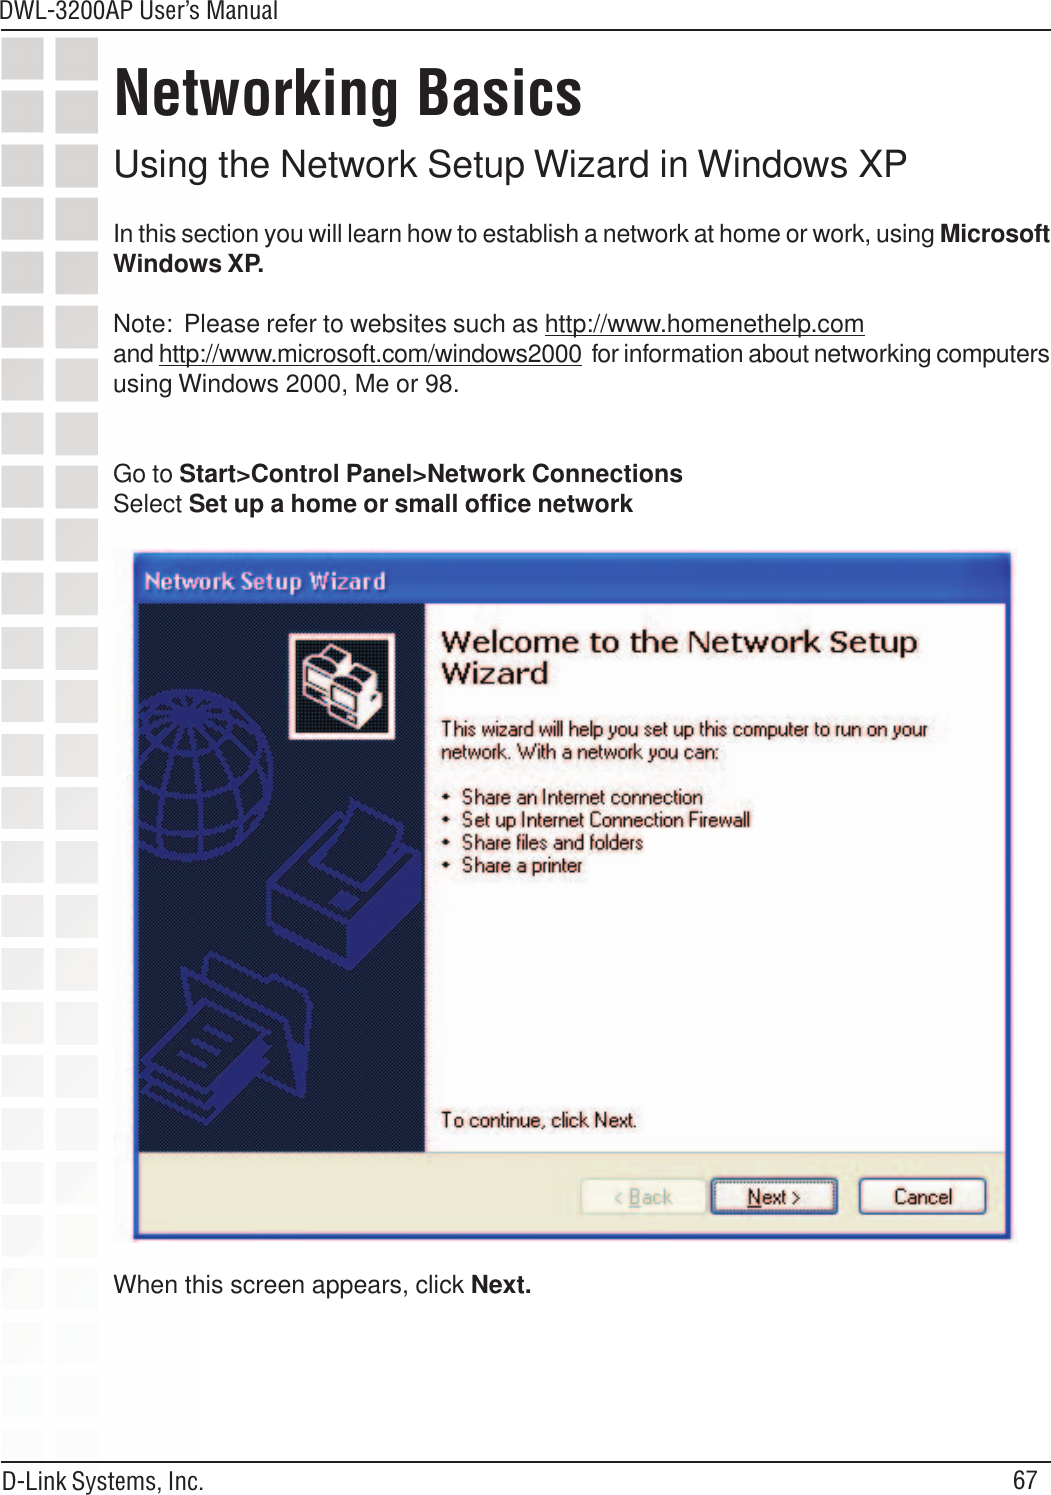 67DWL-3200AP User’s ManualD-Link Systems, Inc.Using the Network Setup Wizard in Windows XPIn this section you will learn how to establish a network at home or work, using MicrosoftWindows XP.Note:  Please refer to websites such as http://www.homenethelp.comand http://www.microsoft.com/windows2000  for information about networking computersusing Windows 2000, Me or 98.Go to Start&gt;Control Panel&gt;Network ConnectionsSelect Set up a home or small office networkNetworking BasicsWhen this screen appears, click Next.